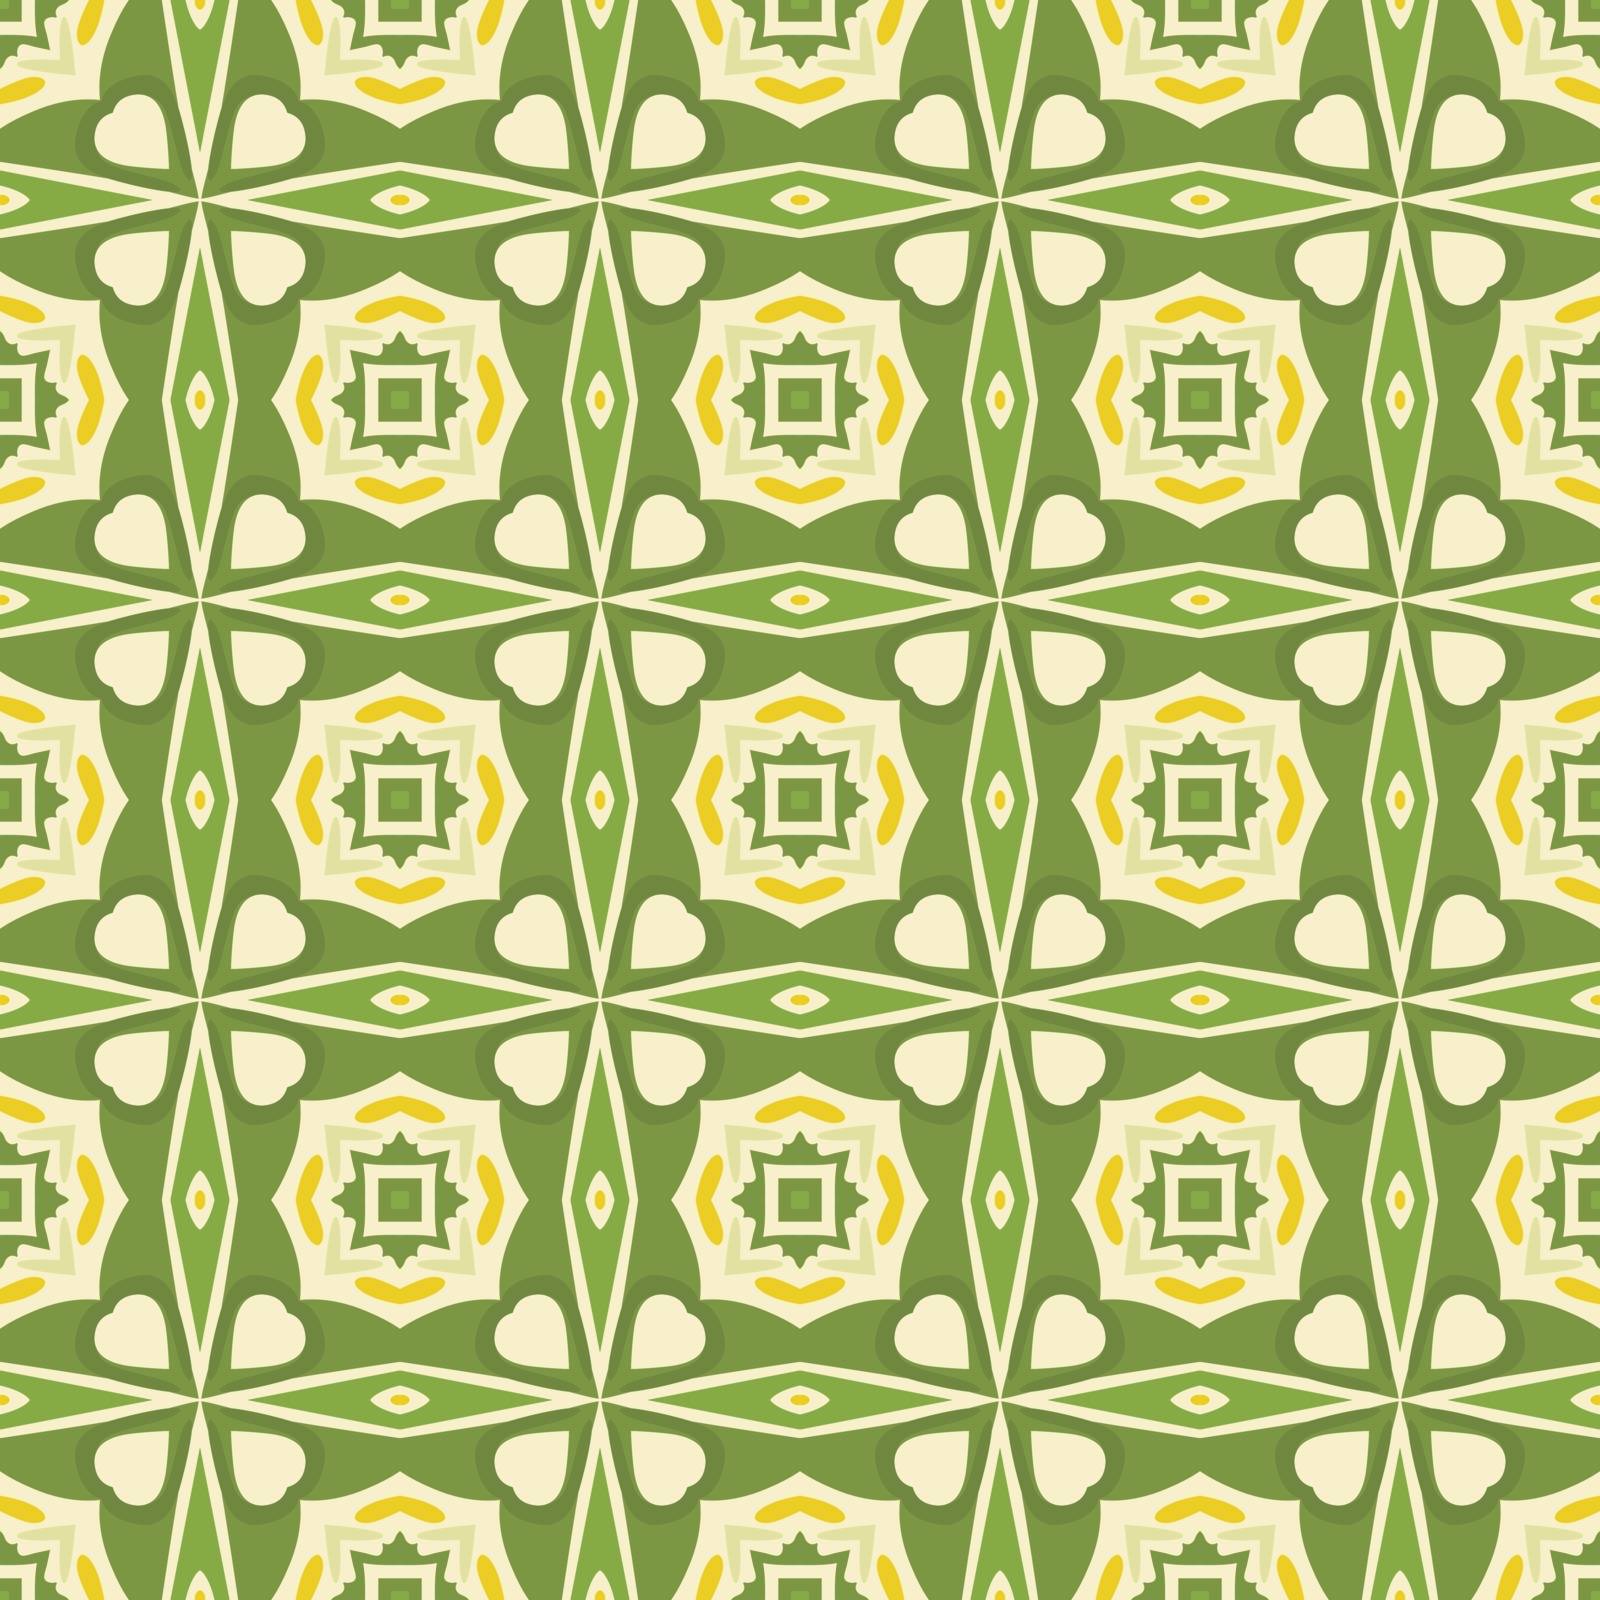 Seamless illustrated pattern made of abstract elements in beige, yellow and green